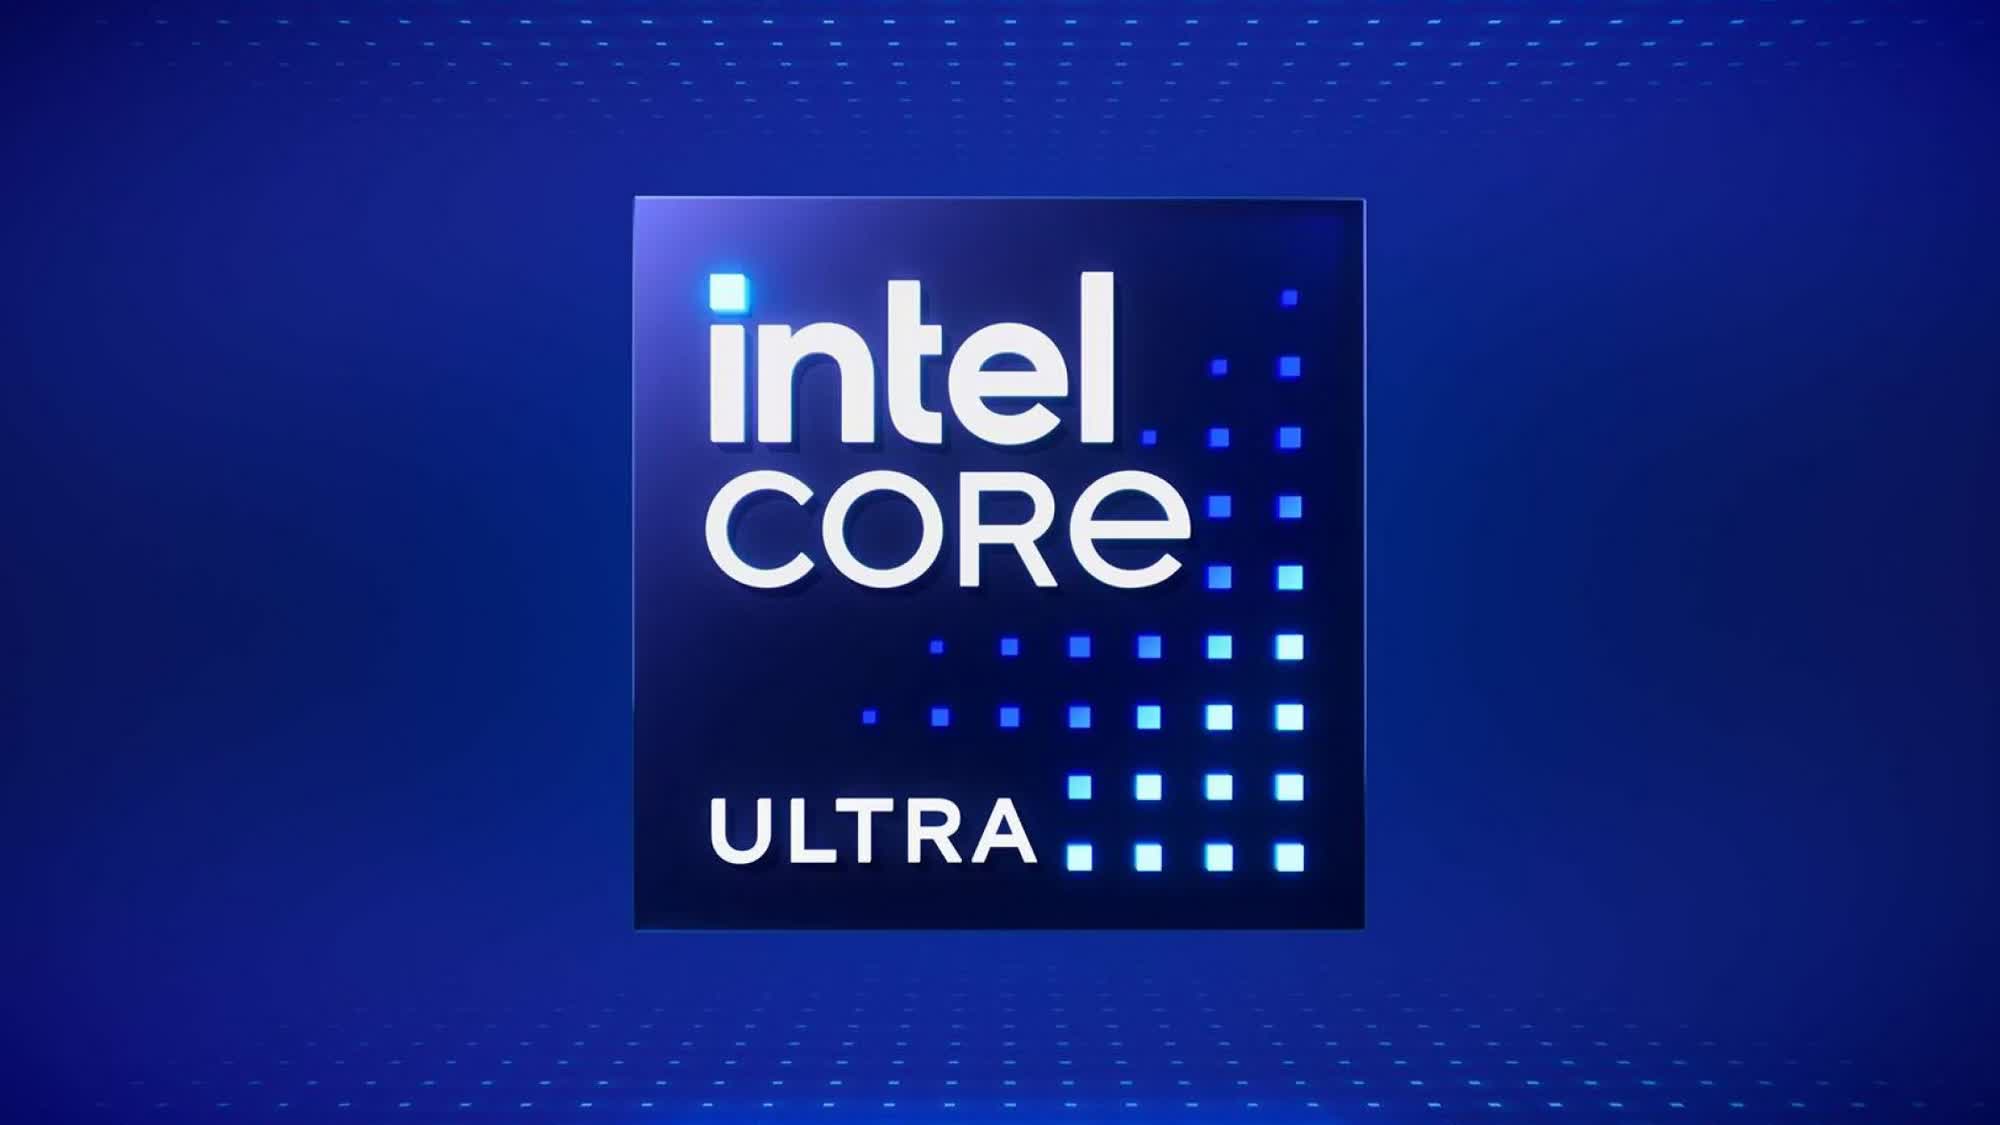 Intel Core Ultra 7 155H underwhelms in leaked benchmarks ahead of official launch – The TechLead